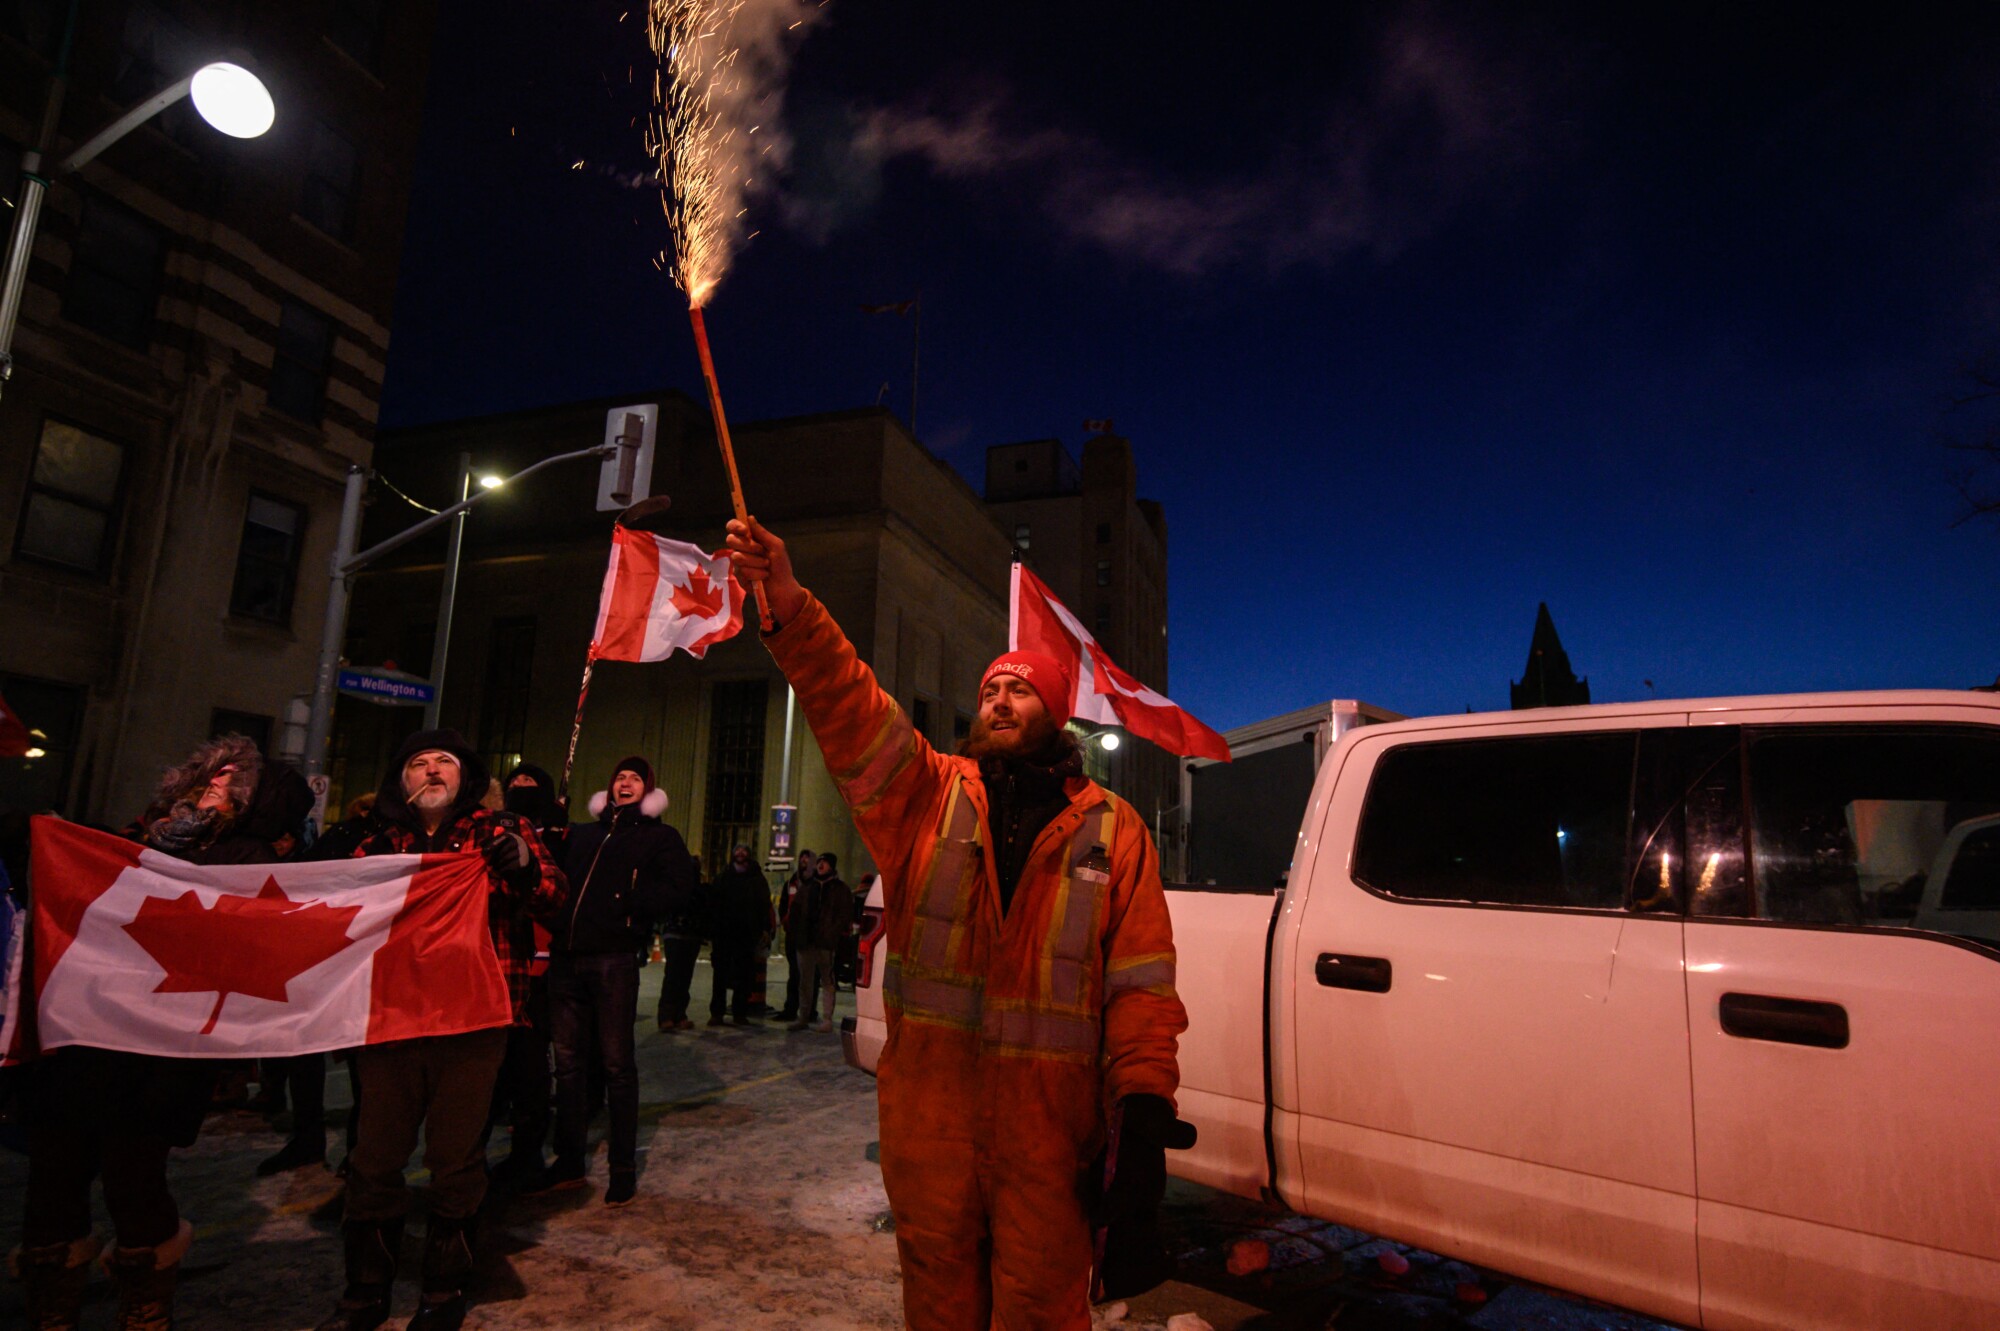 A demonstrator lets off fireworks during a protest by truck drivers over pandemic health rules and the Trudeau government.